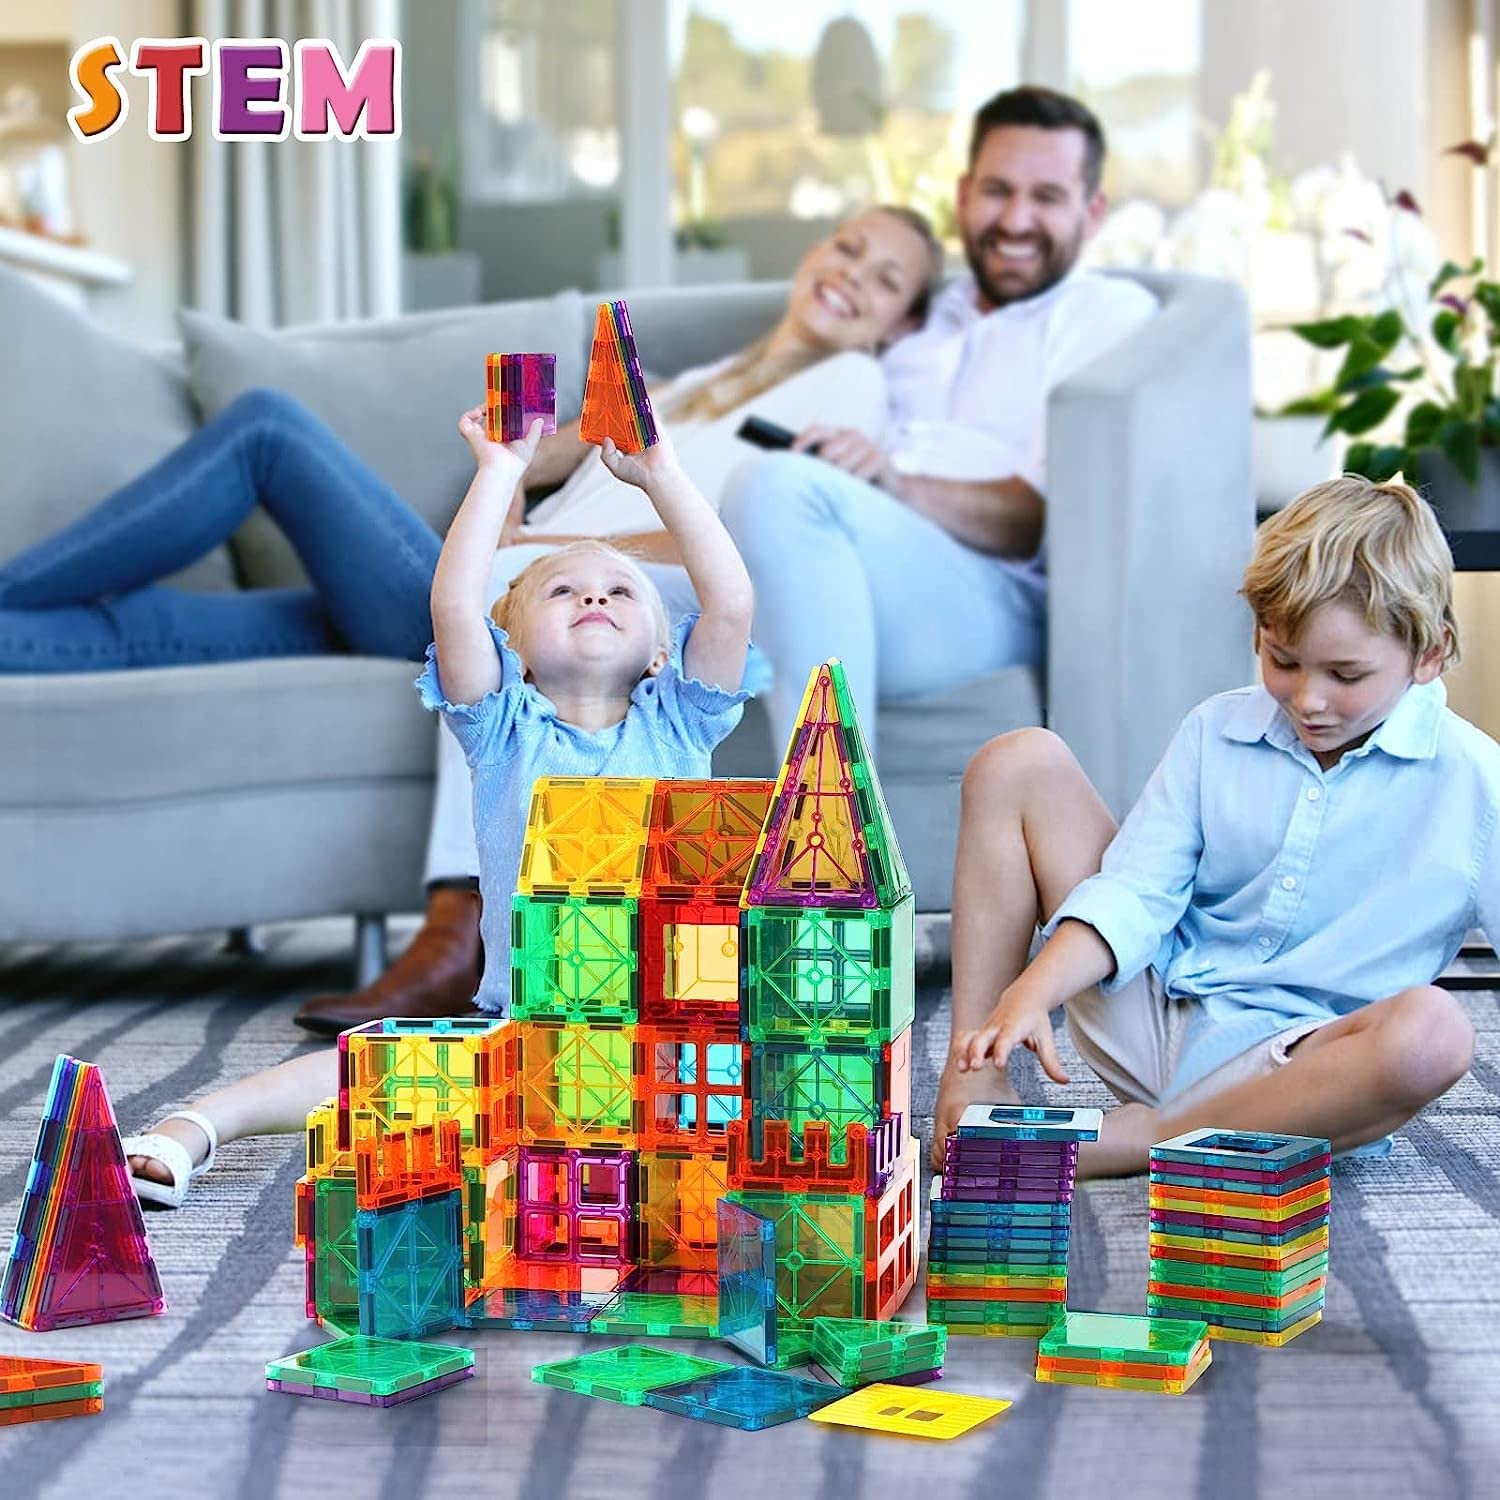 Braintastic 18 Pcs Magnetic Tiles Building Block Constructing and Creative Learning Educational STEM Toy for Kids Age 3+ Years